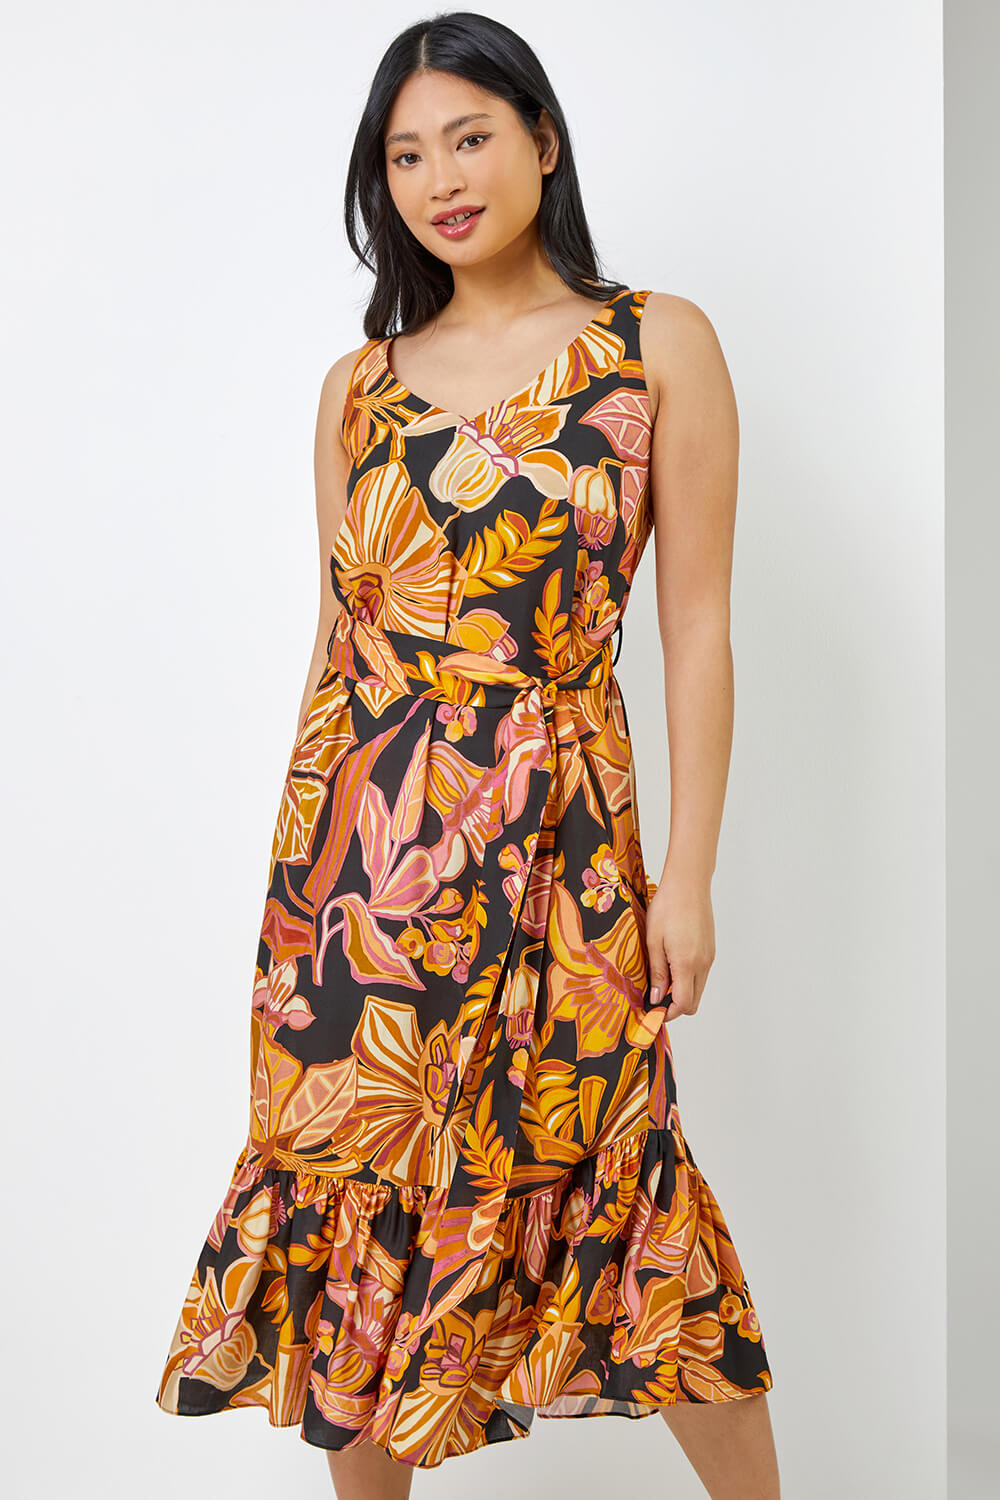 Rust Petite Floral Print Tiered Dress, Image 2 of 6